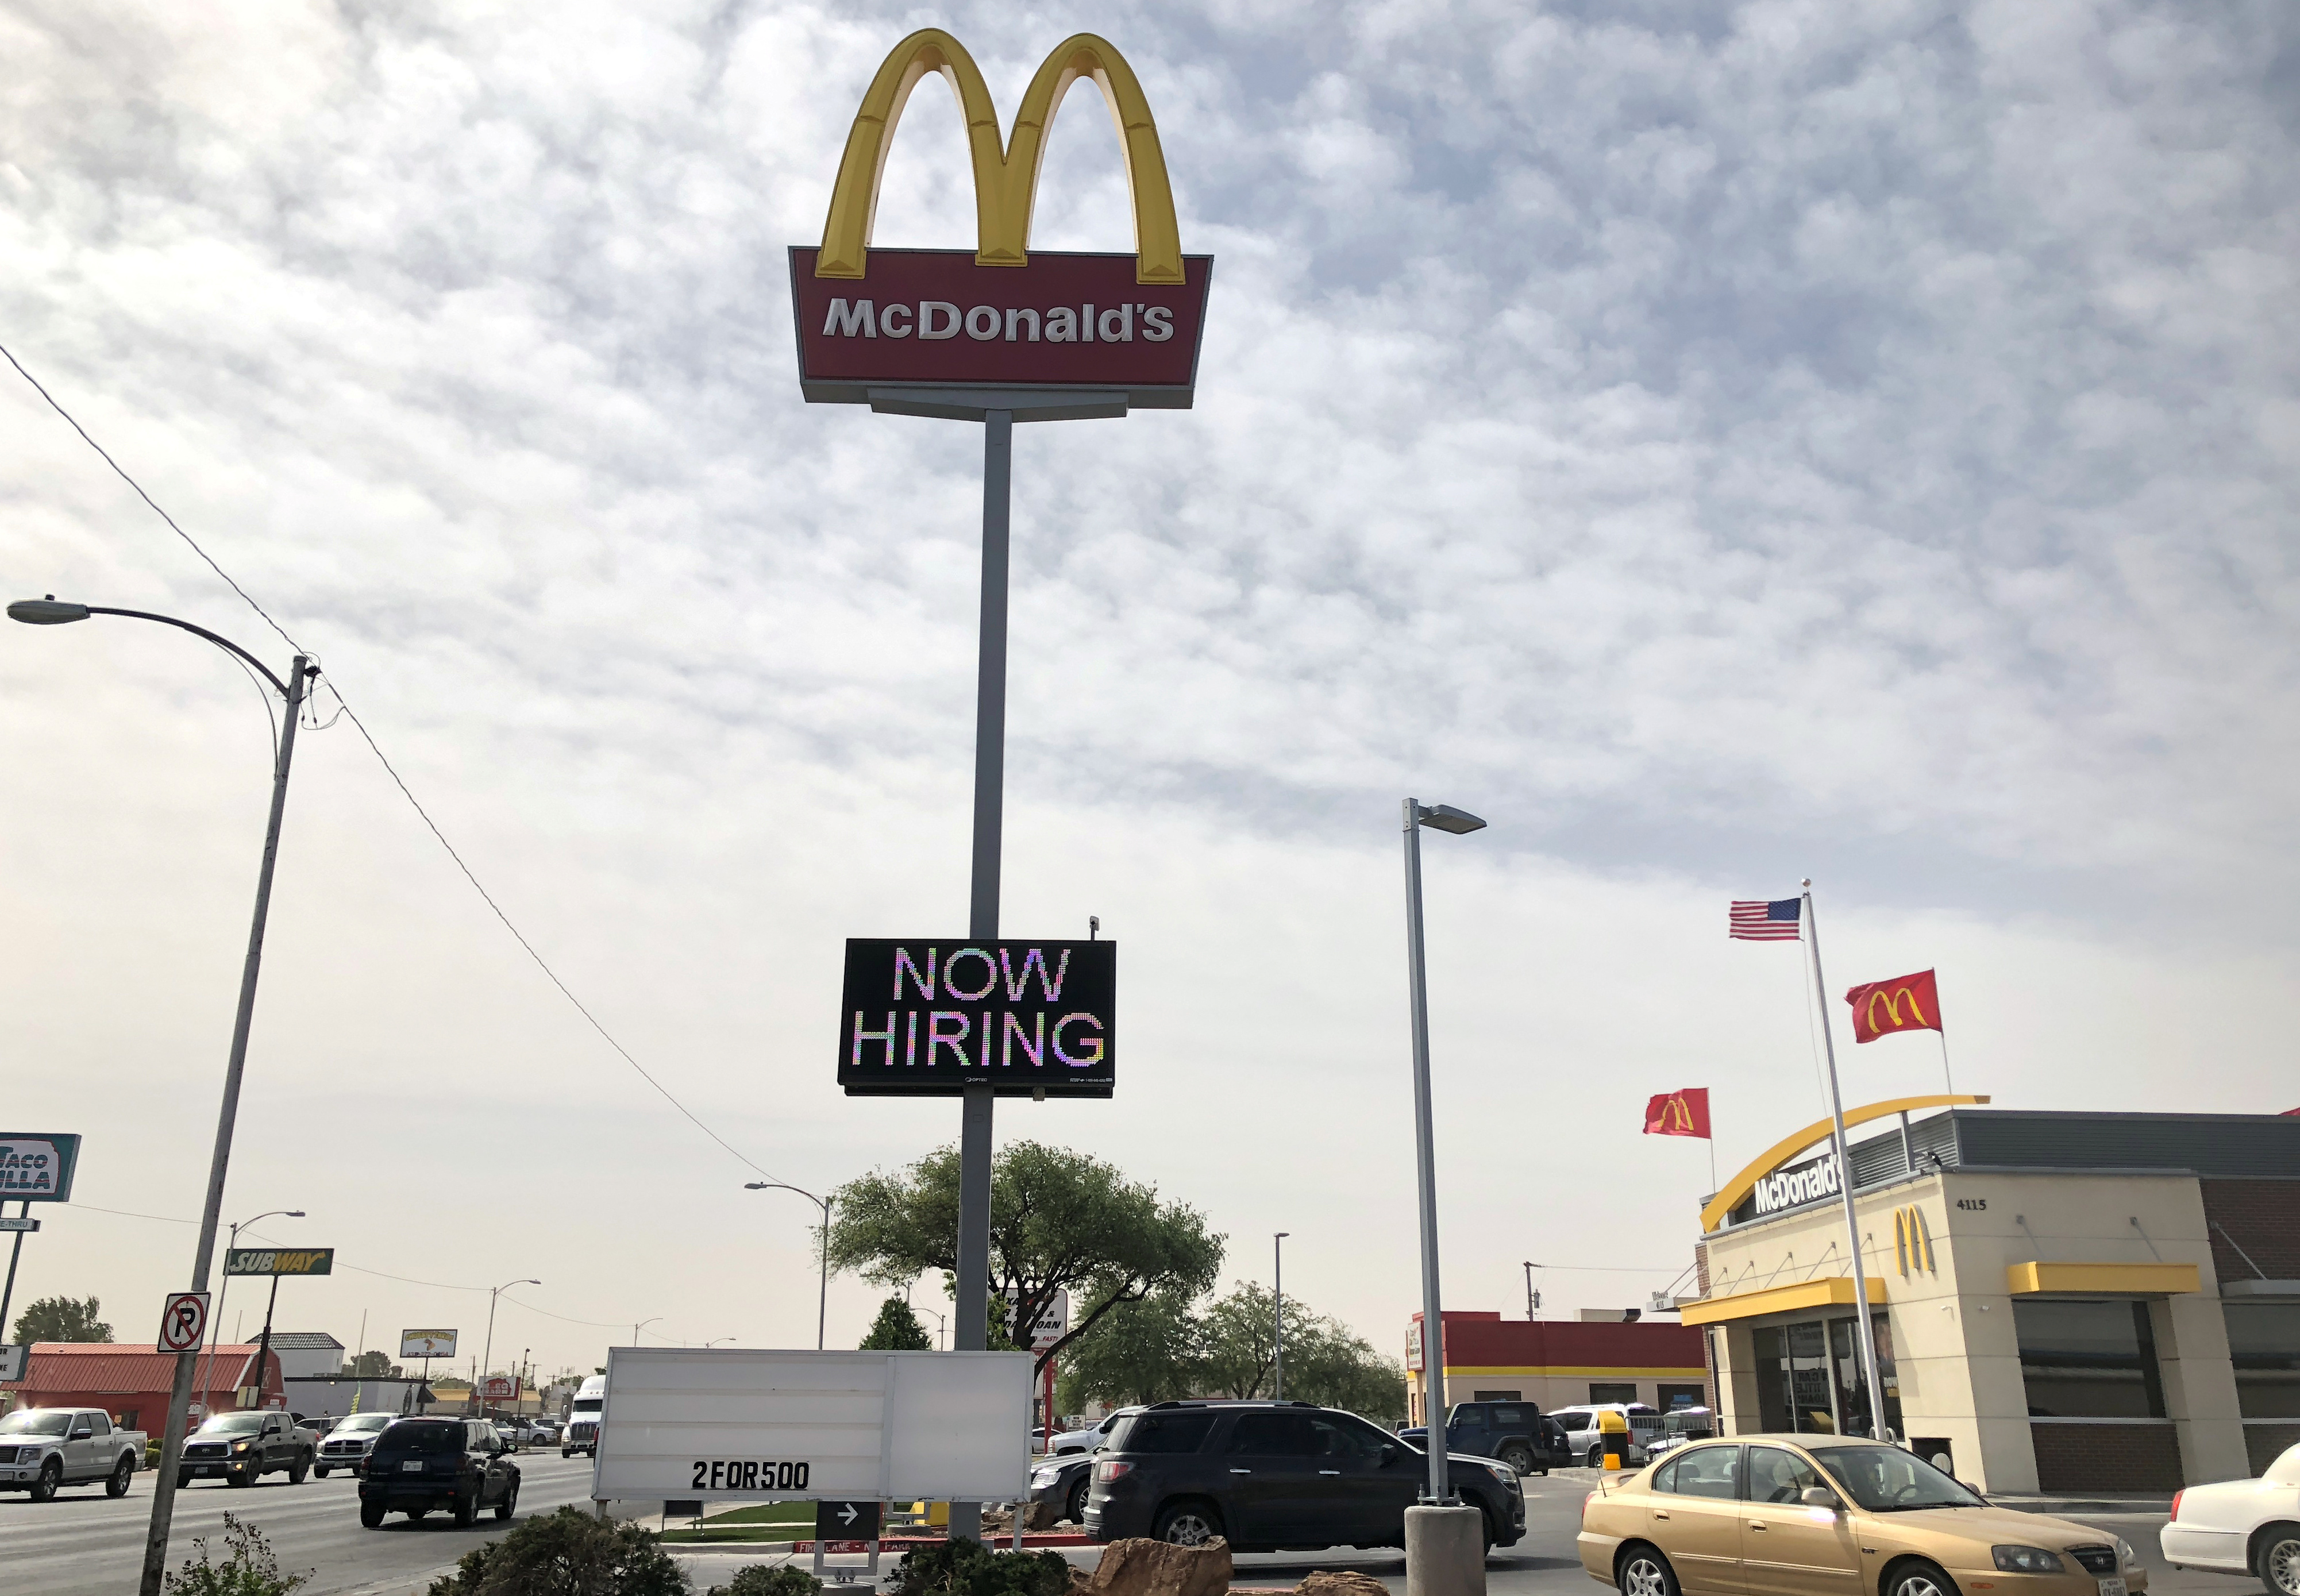 A McDonald's restaurant displays a 'Now Hiring' sign, one of many seen at businesses where an oil boom is fueling worker shortages, in Odessa, Texas, U.S., April 13, 2018. REUTERS/Ann Saphir